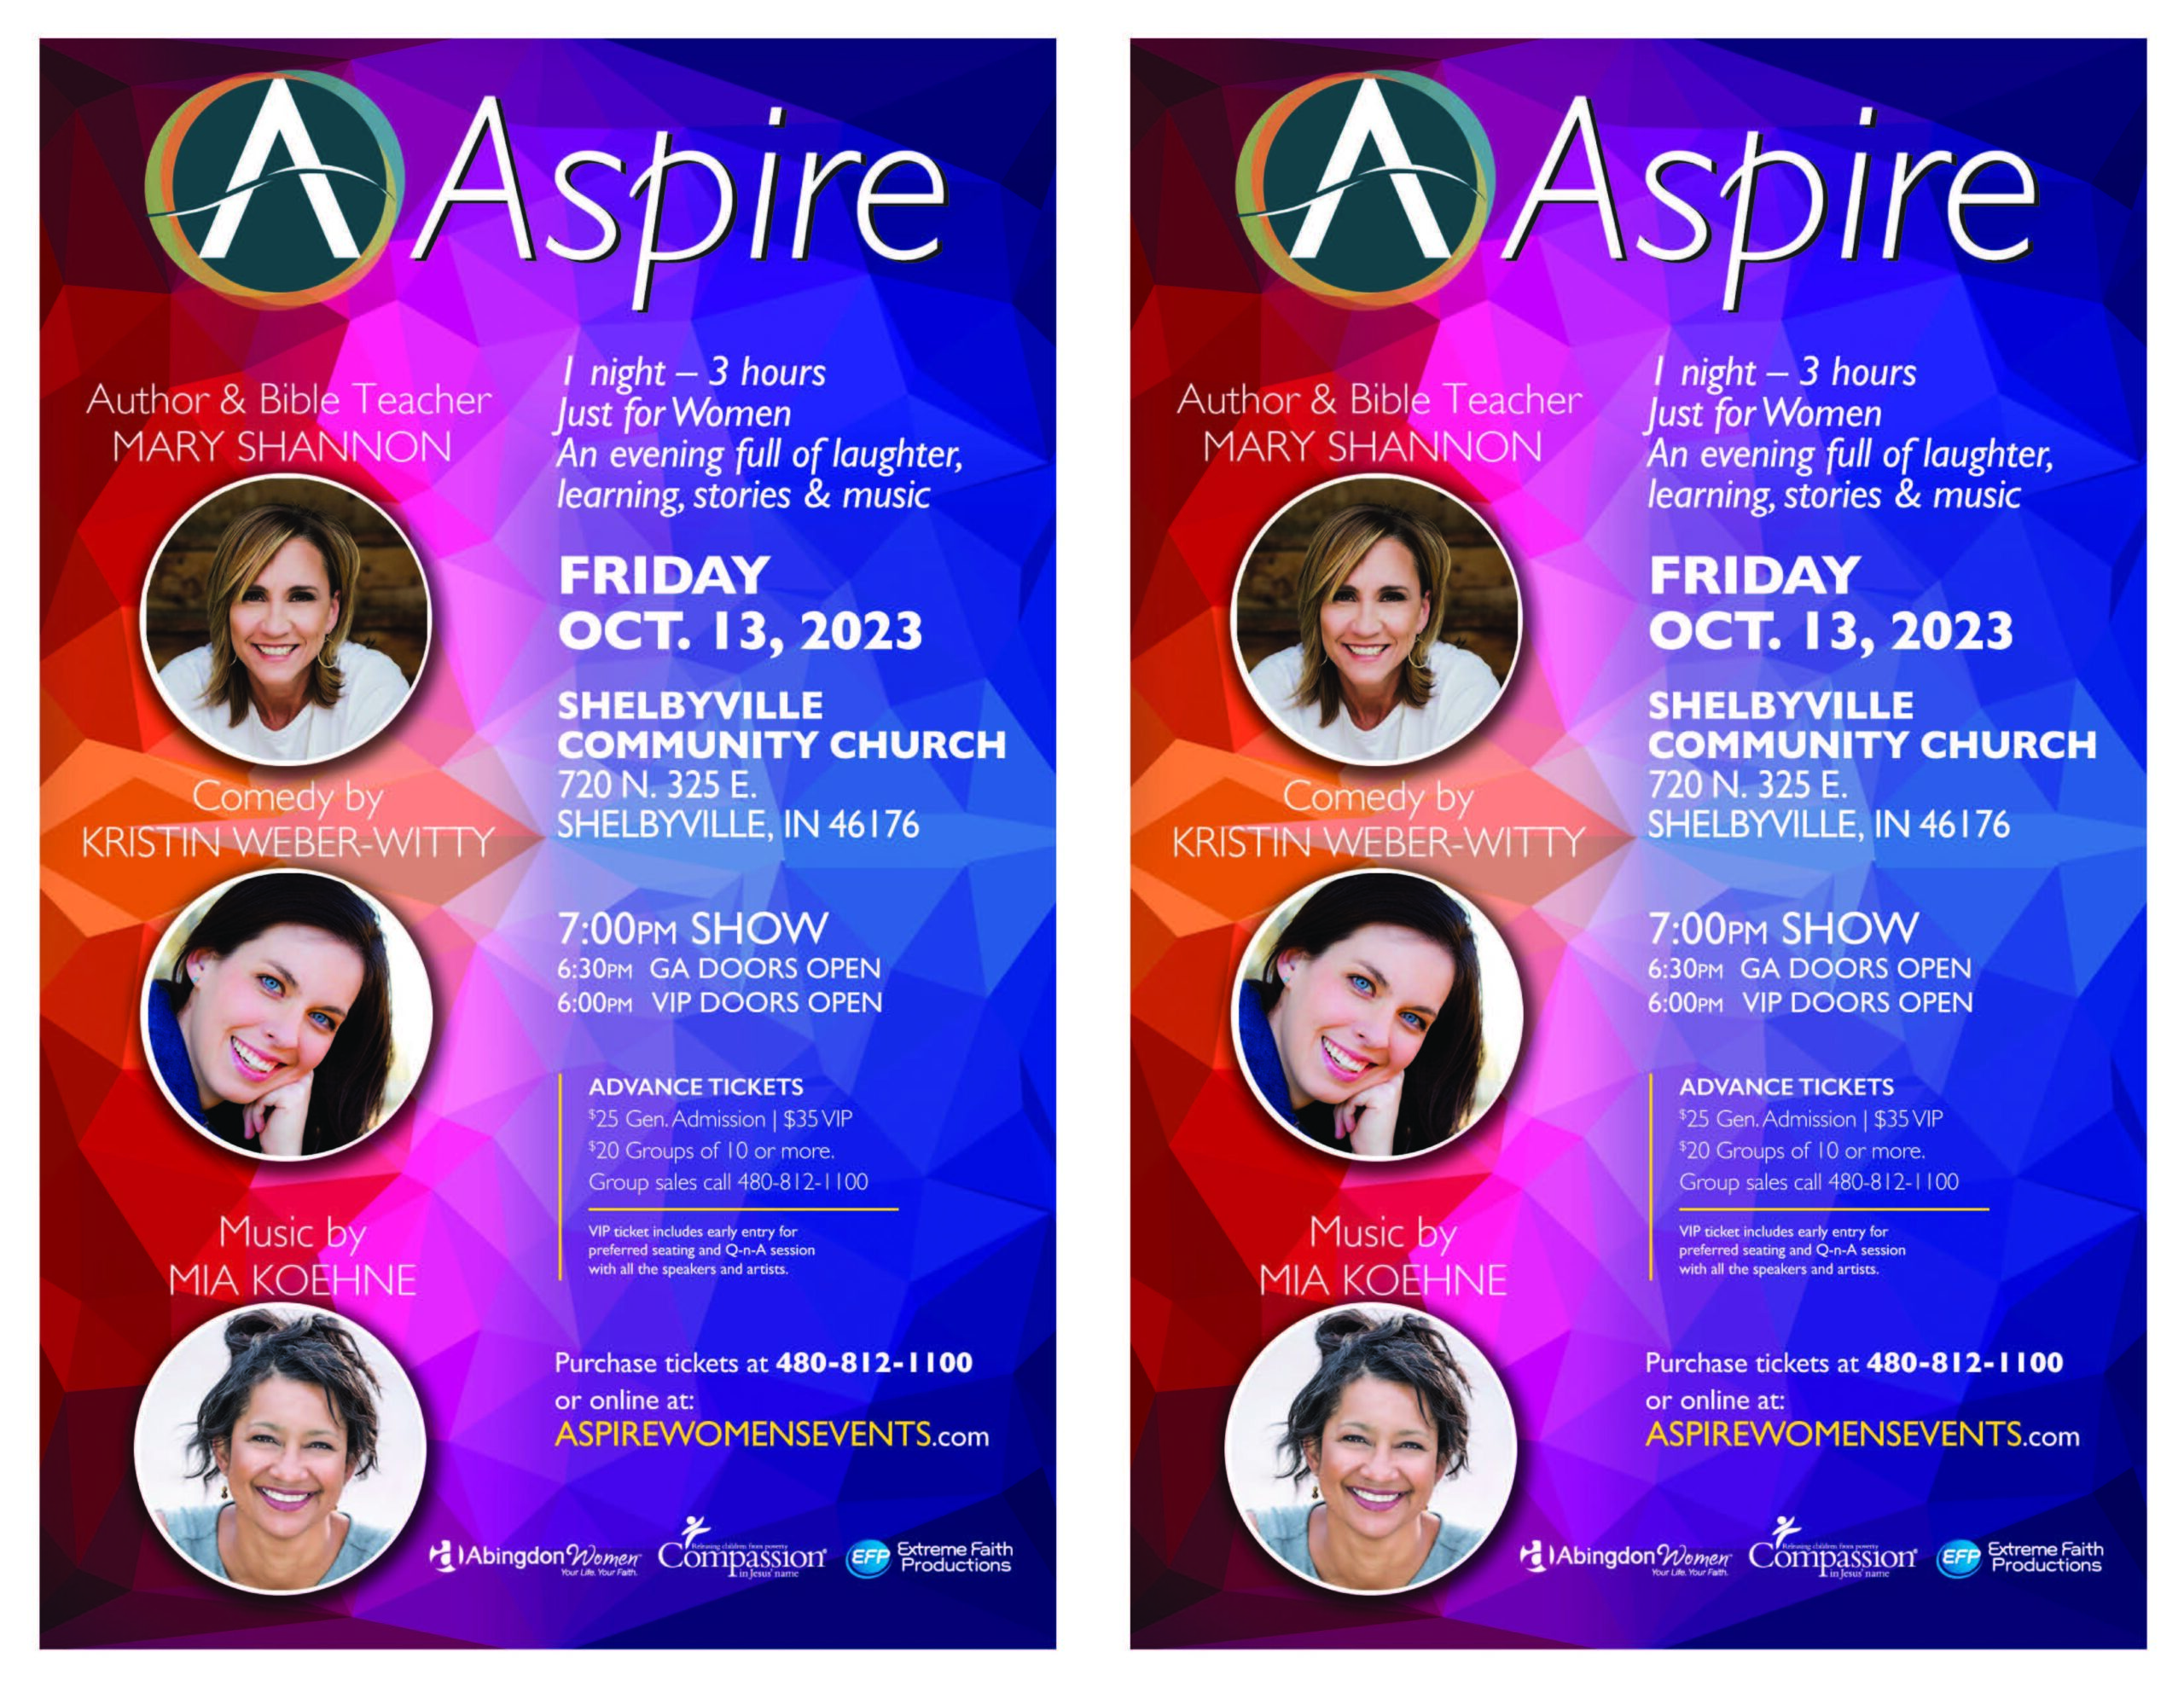 Aspire Friday Oct 13 Shelbyville IN=2UP